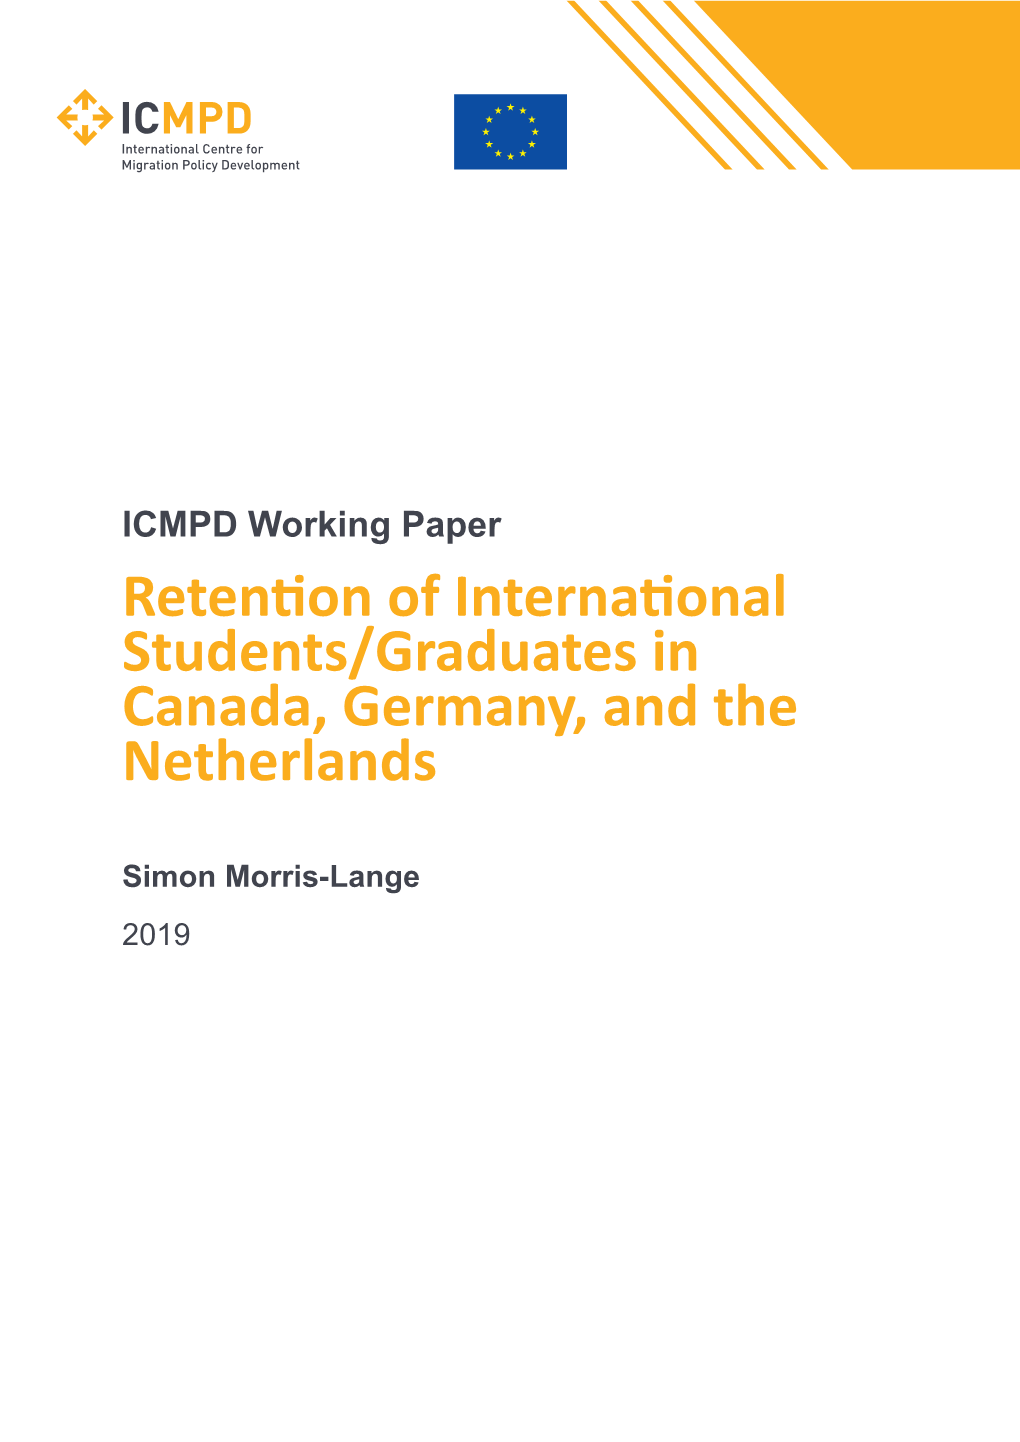 Retention of International Students/Graduates in Canada, Germany, and the Netherlands